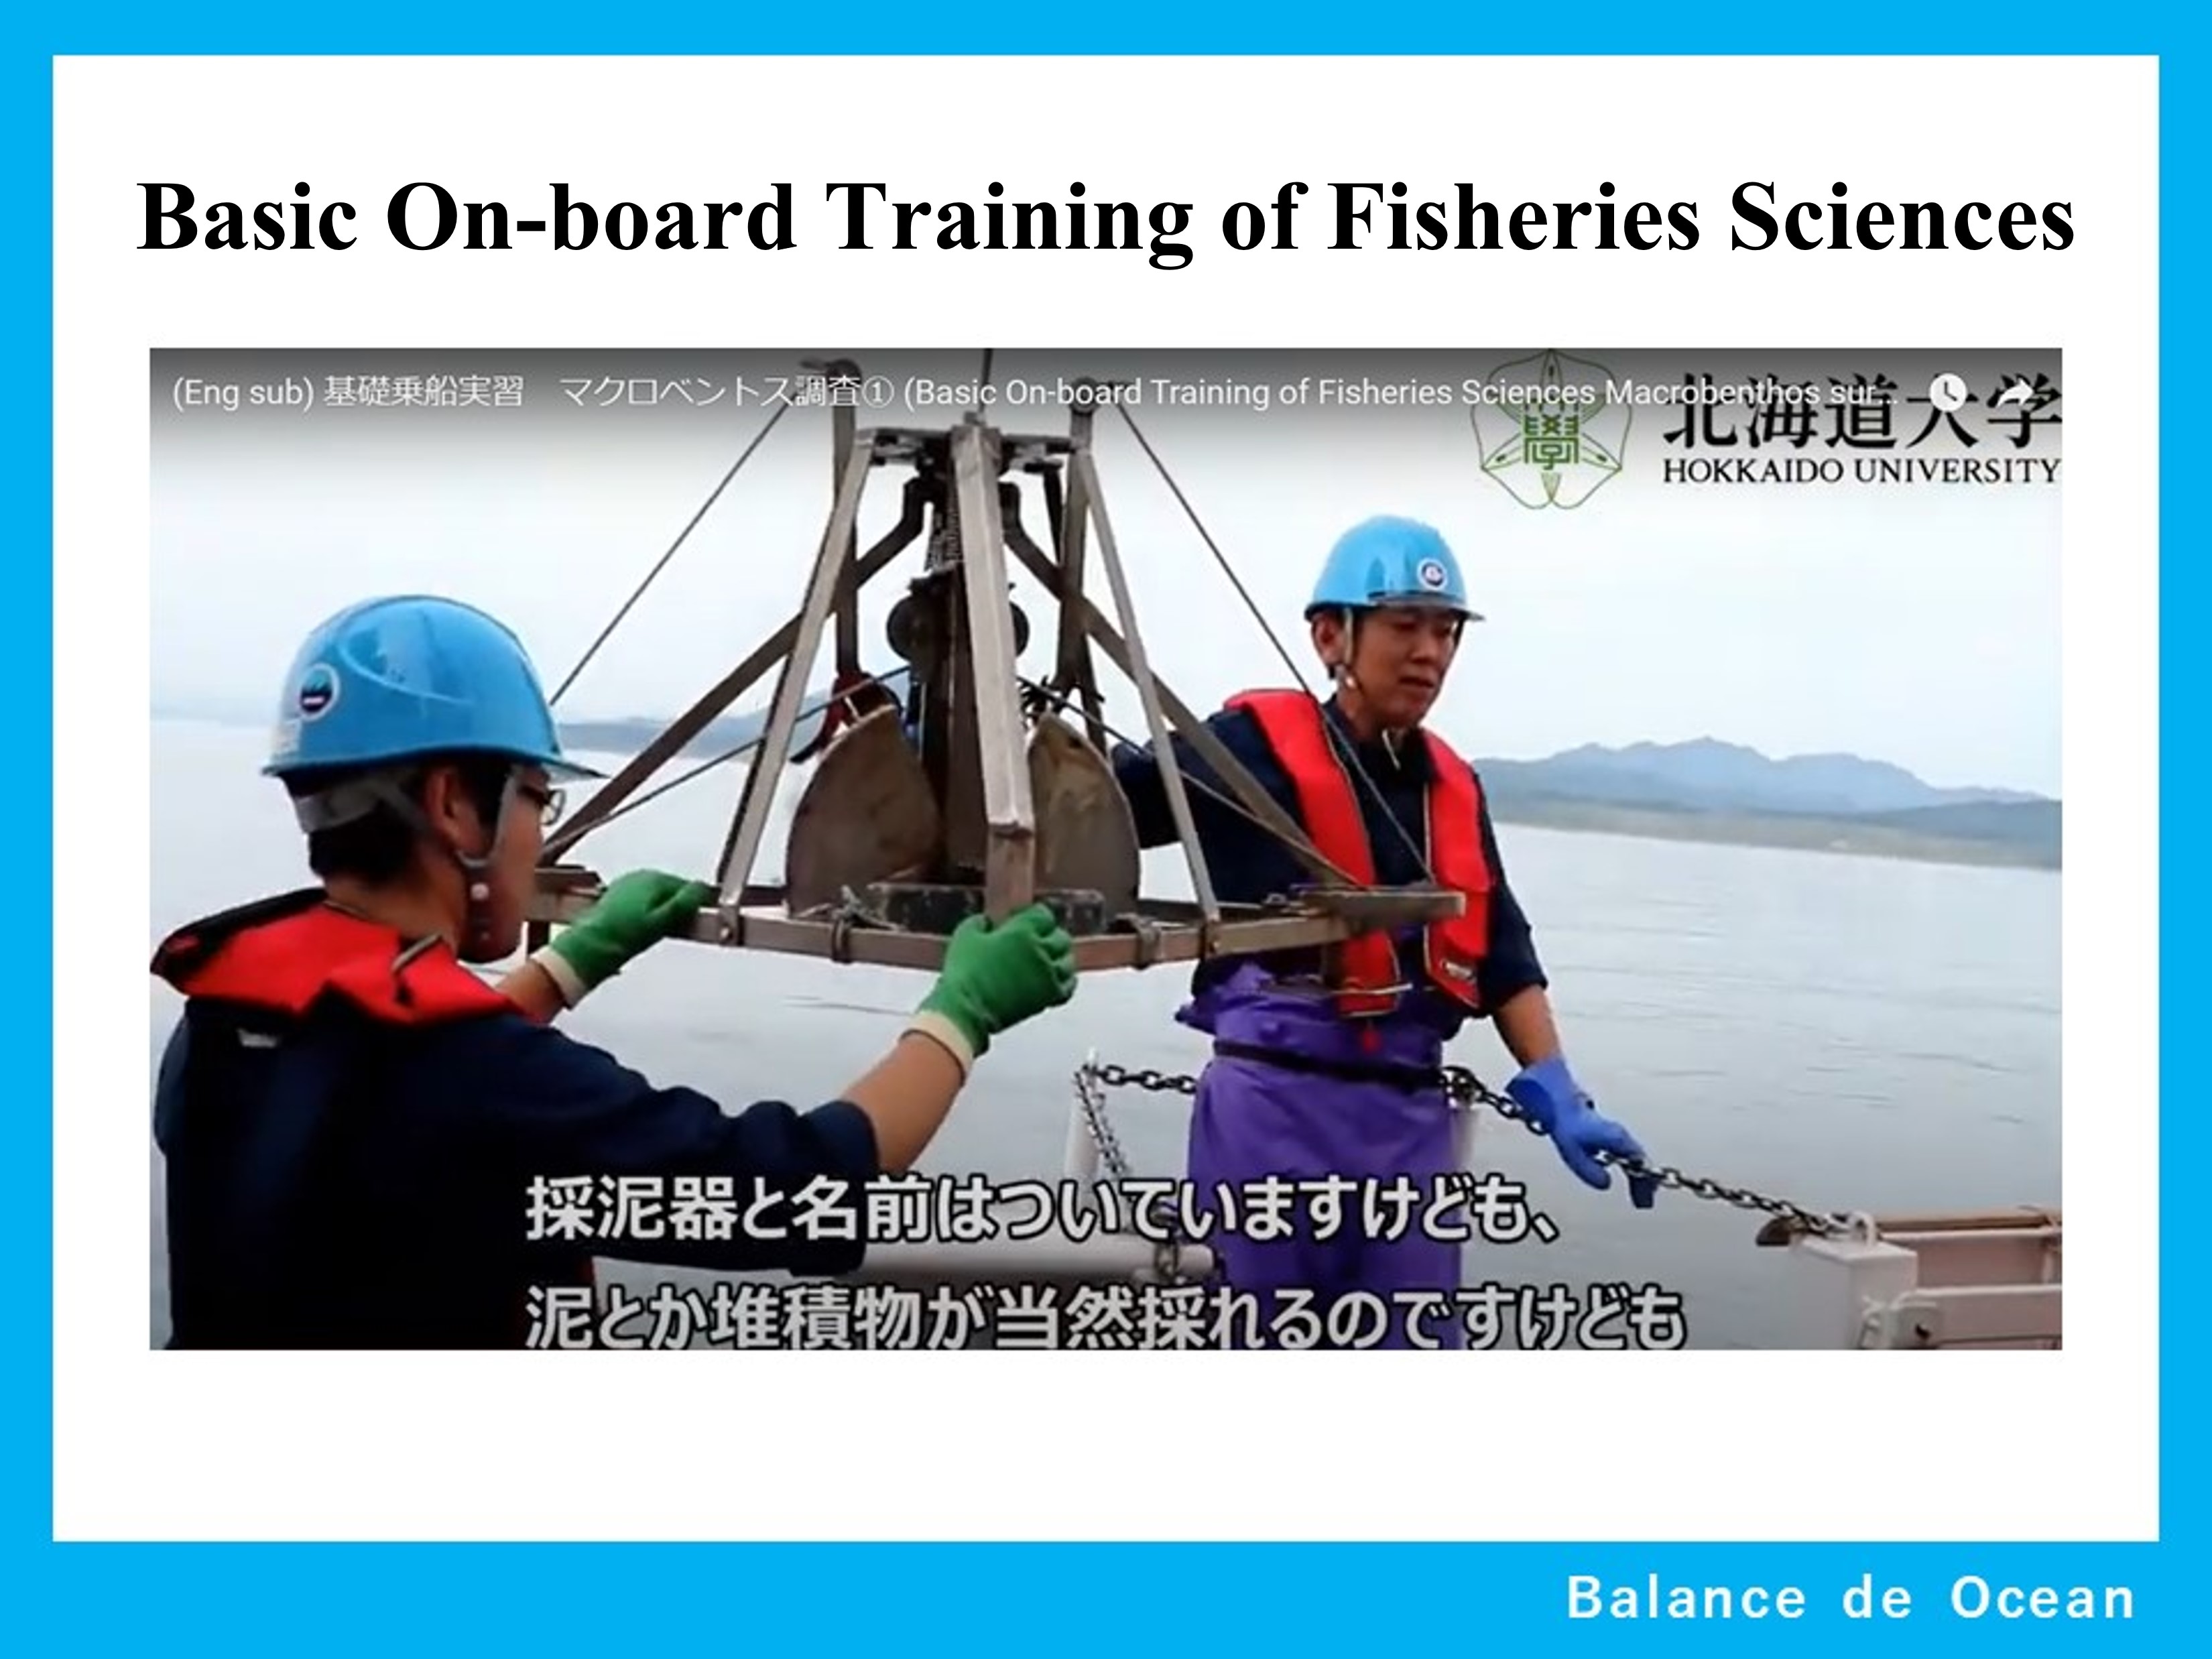 Basic On-board Training of Fisheries Sciences
